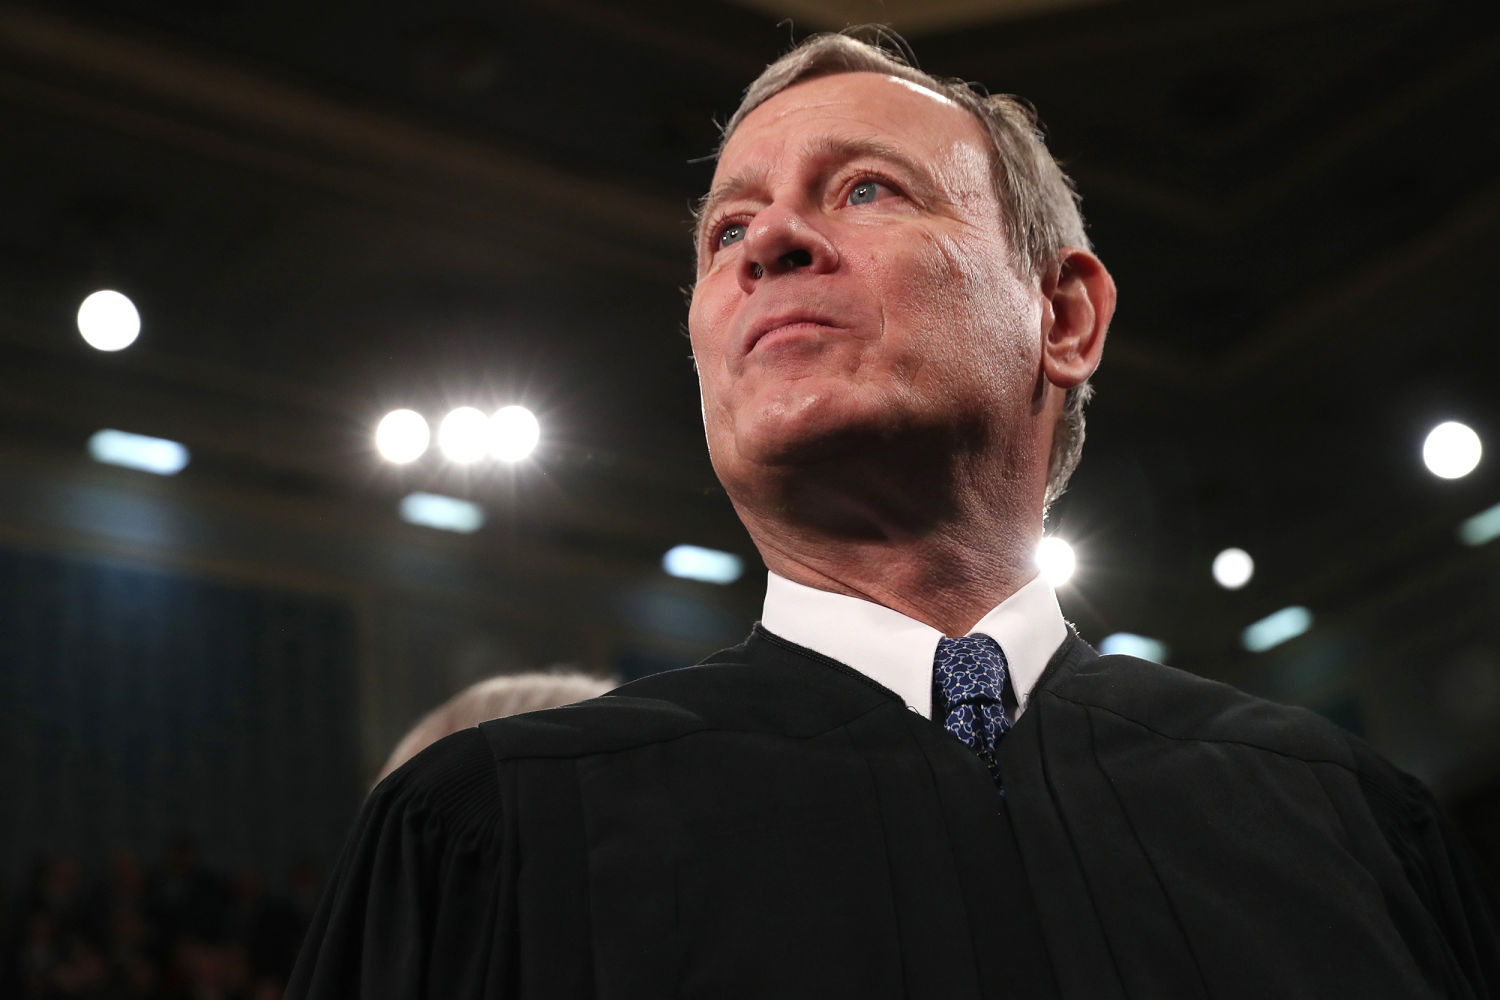 Chief Justice Roberts declines to meet with Democrats on ethics concerns amid Alito flag flap